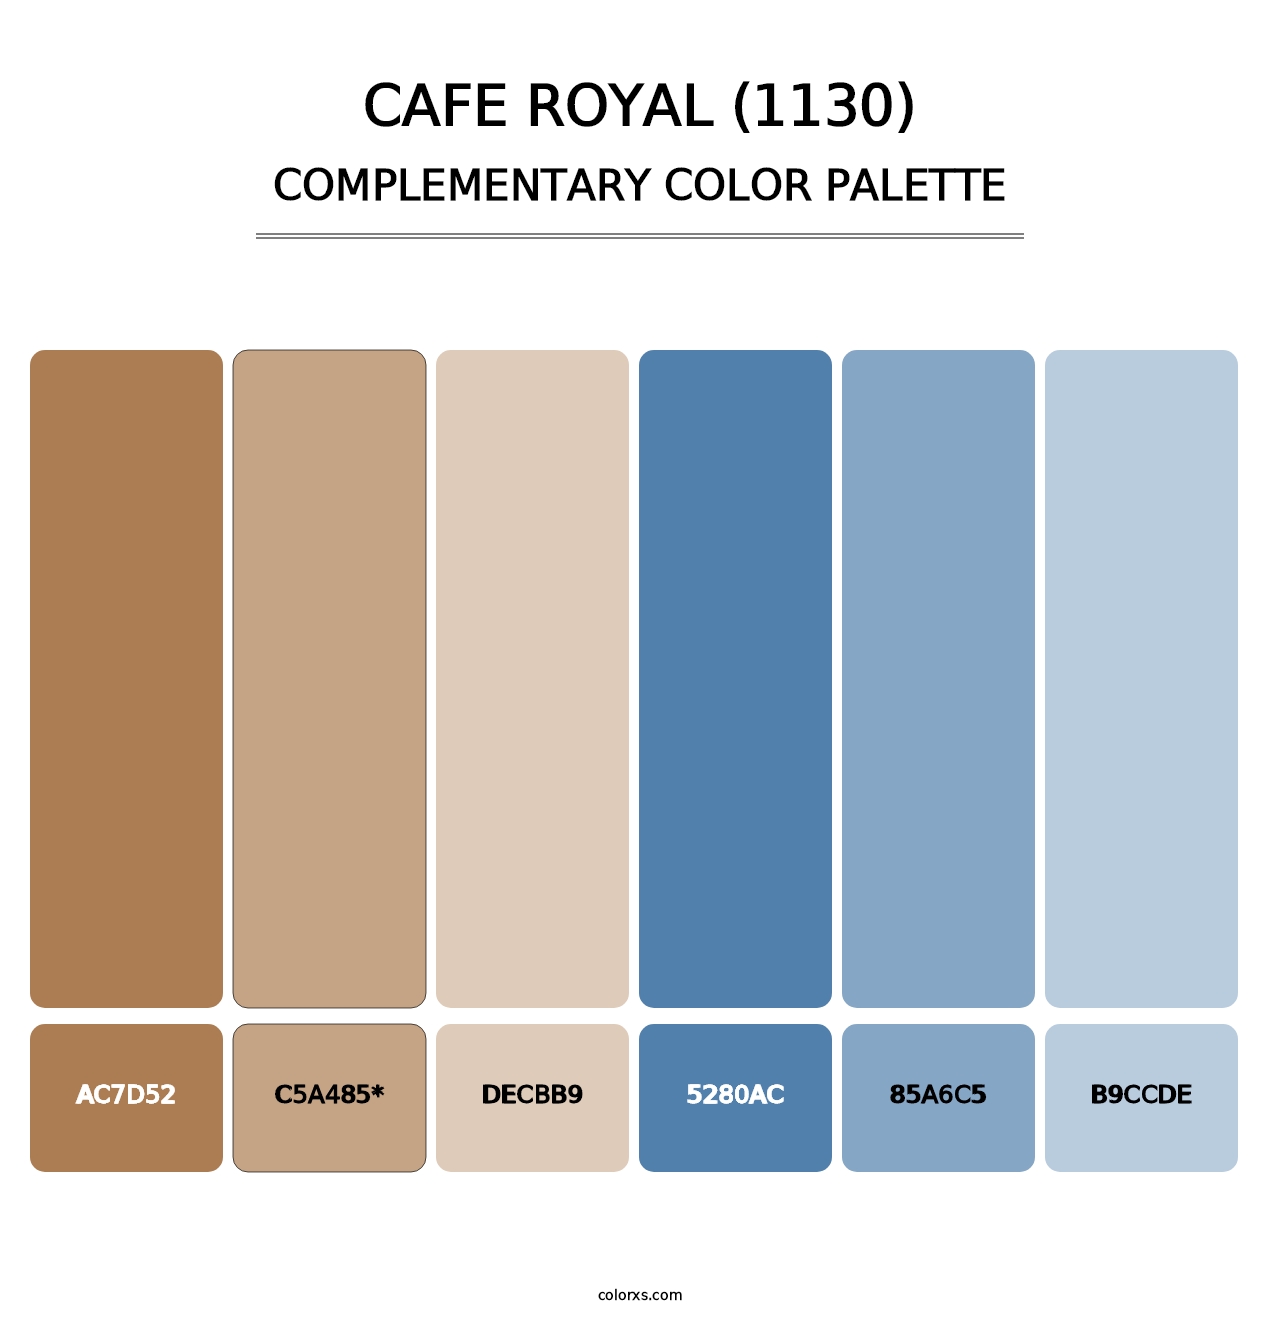 Cafe Royal (1130) - Complementary Color Palette